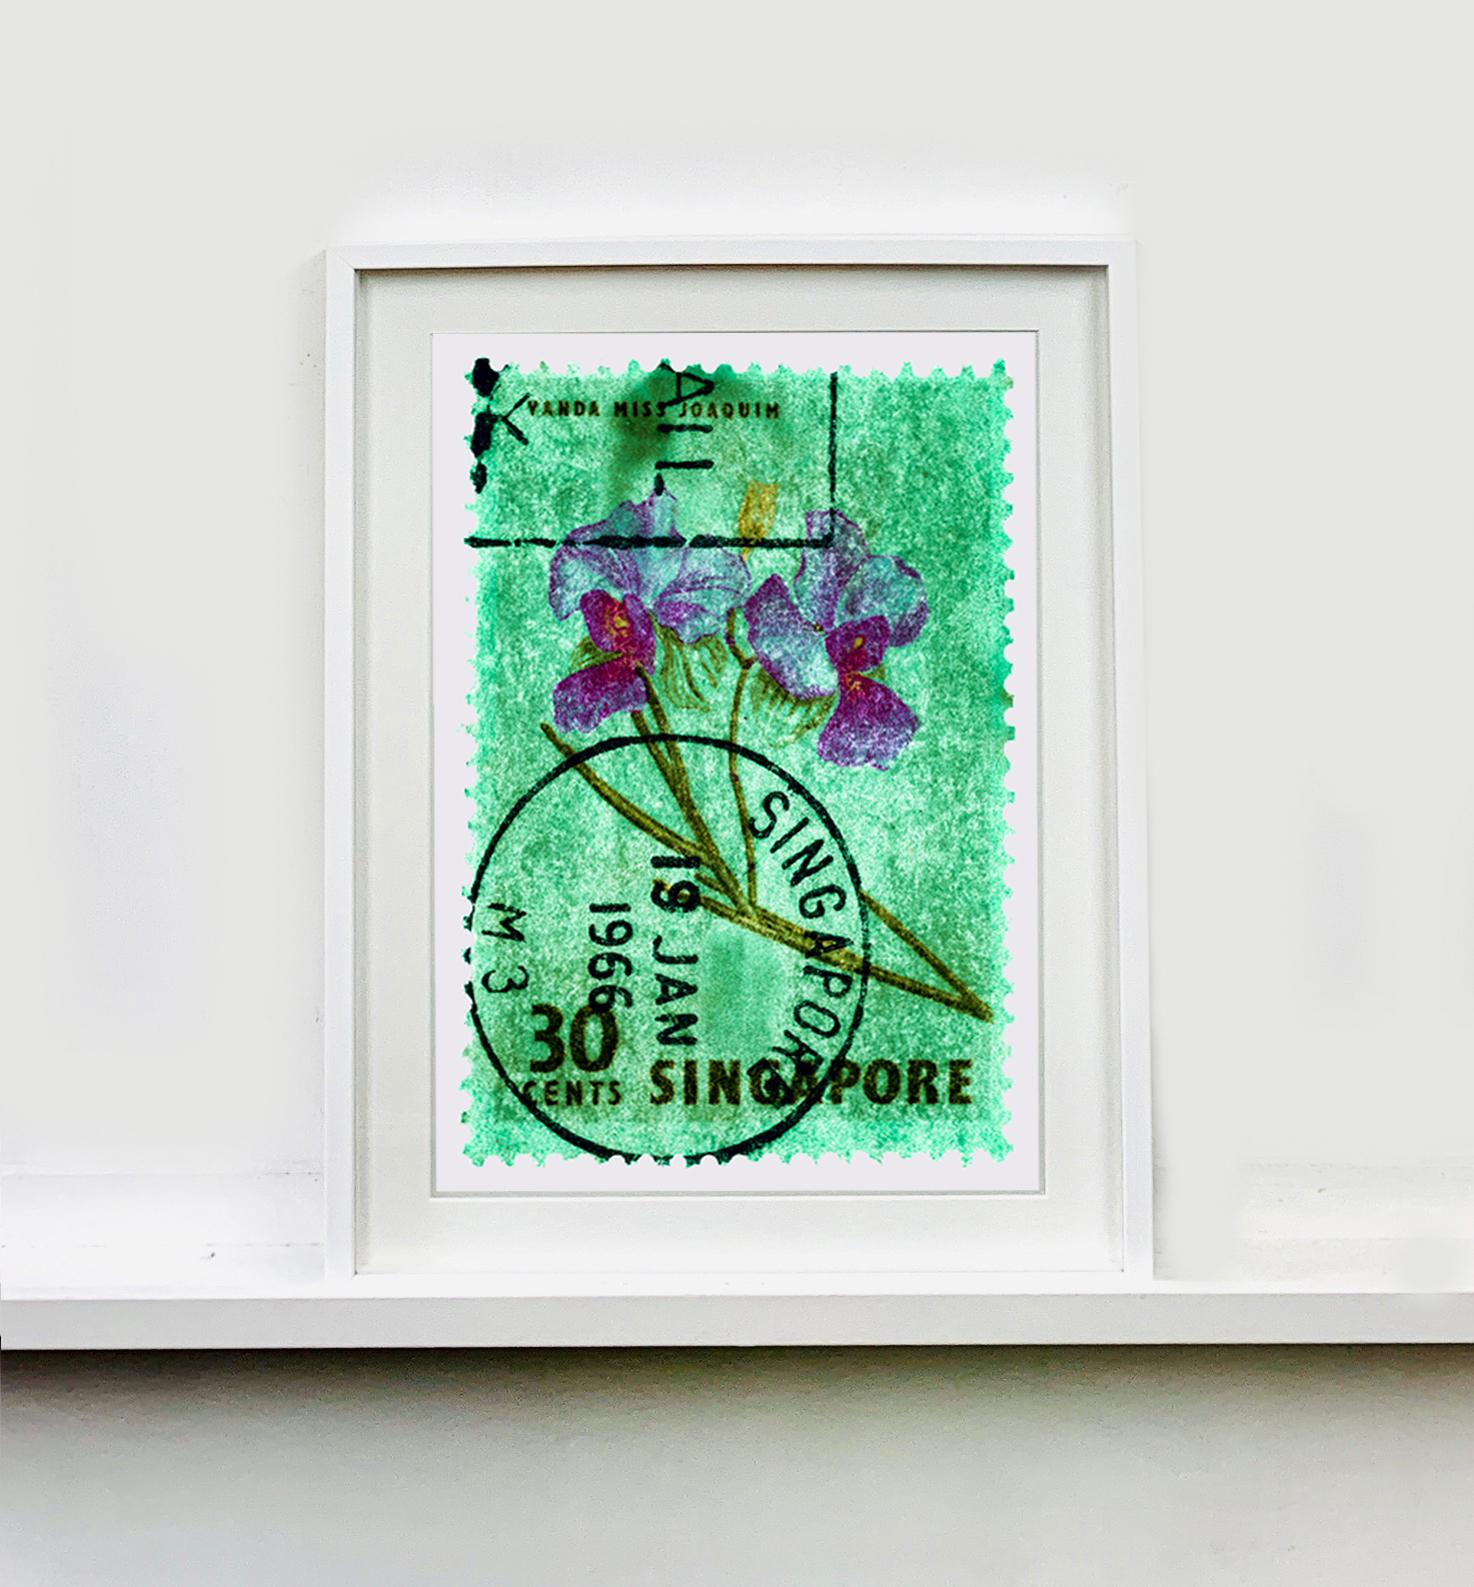 30 Cents Singapore Orchid Green, from the Heidler & Heeps Stamp Collection.
This historic postage stamps that make up the Heidler & Heeps Stamp Collection, Singapore Series 'Postcards from Afar' have been given a twenty-first century pop art lease